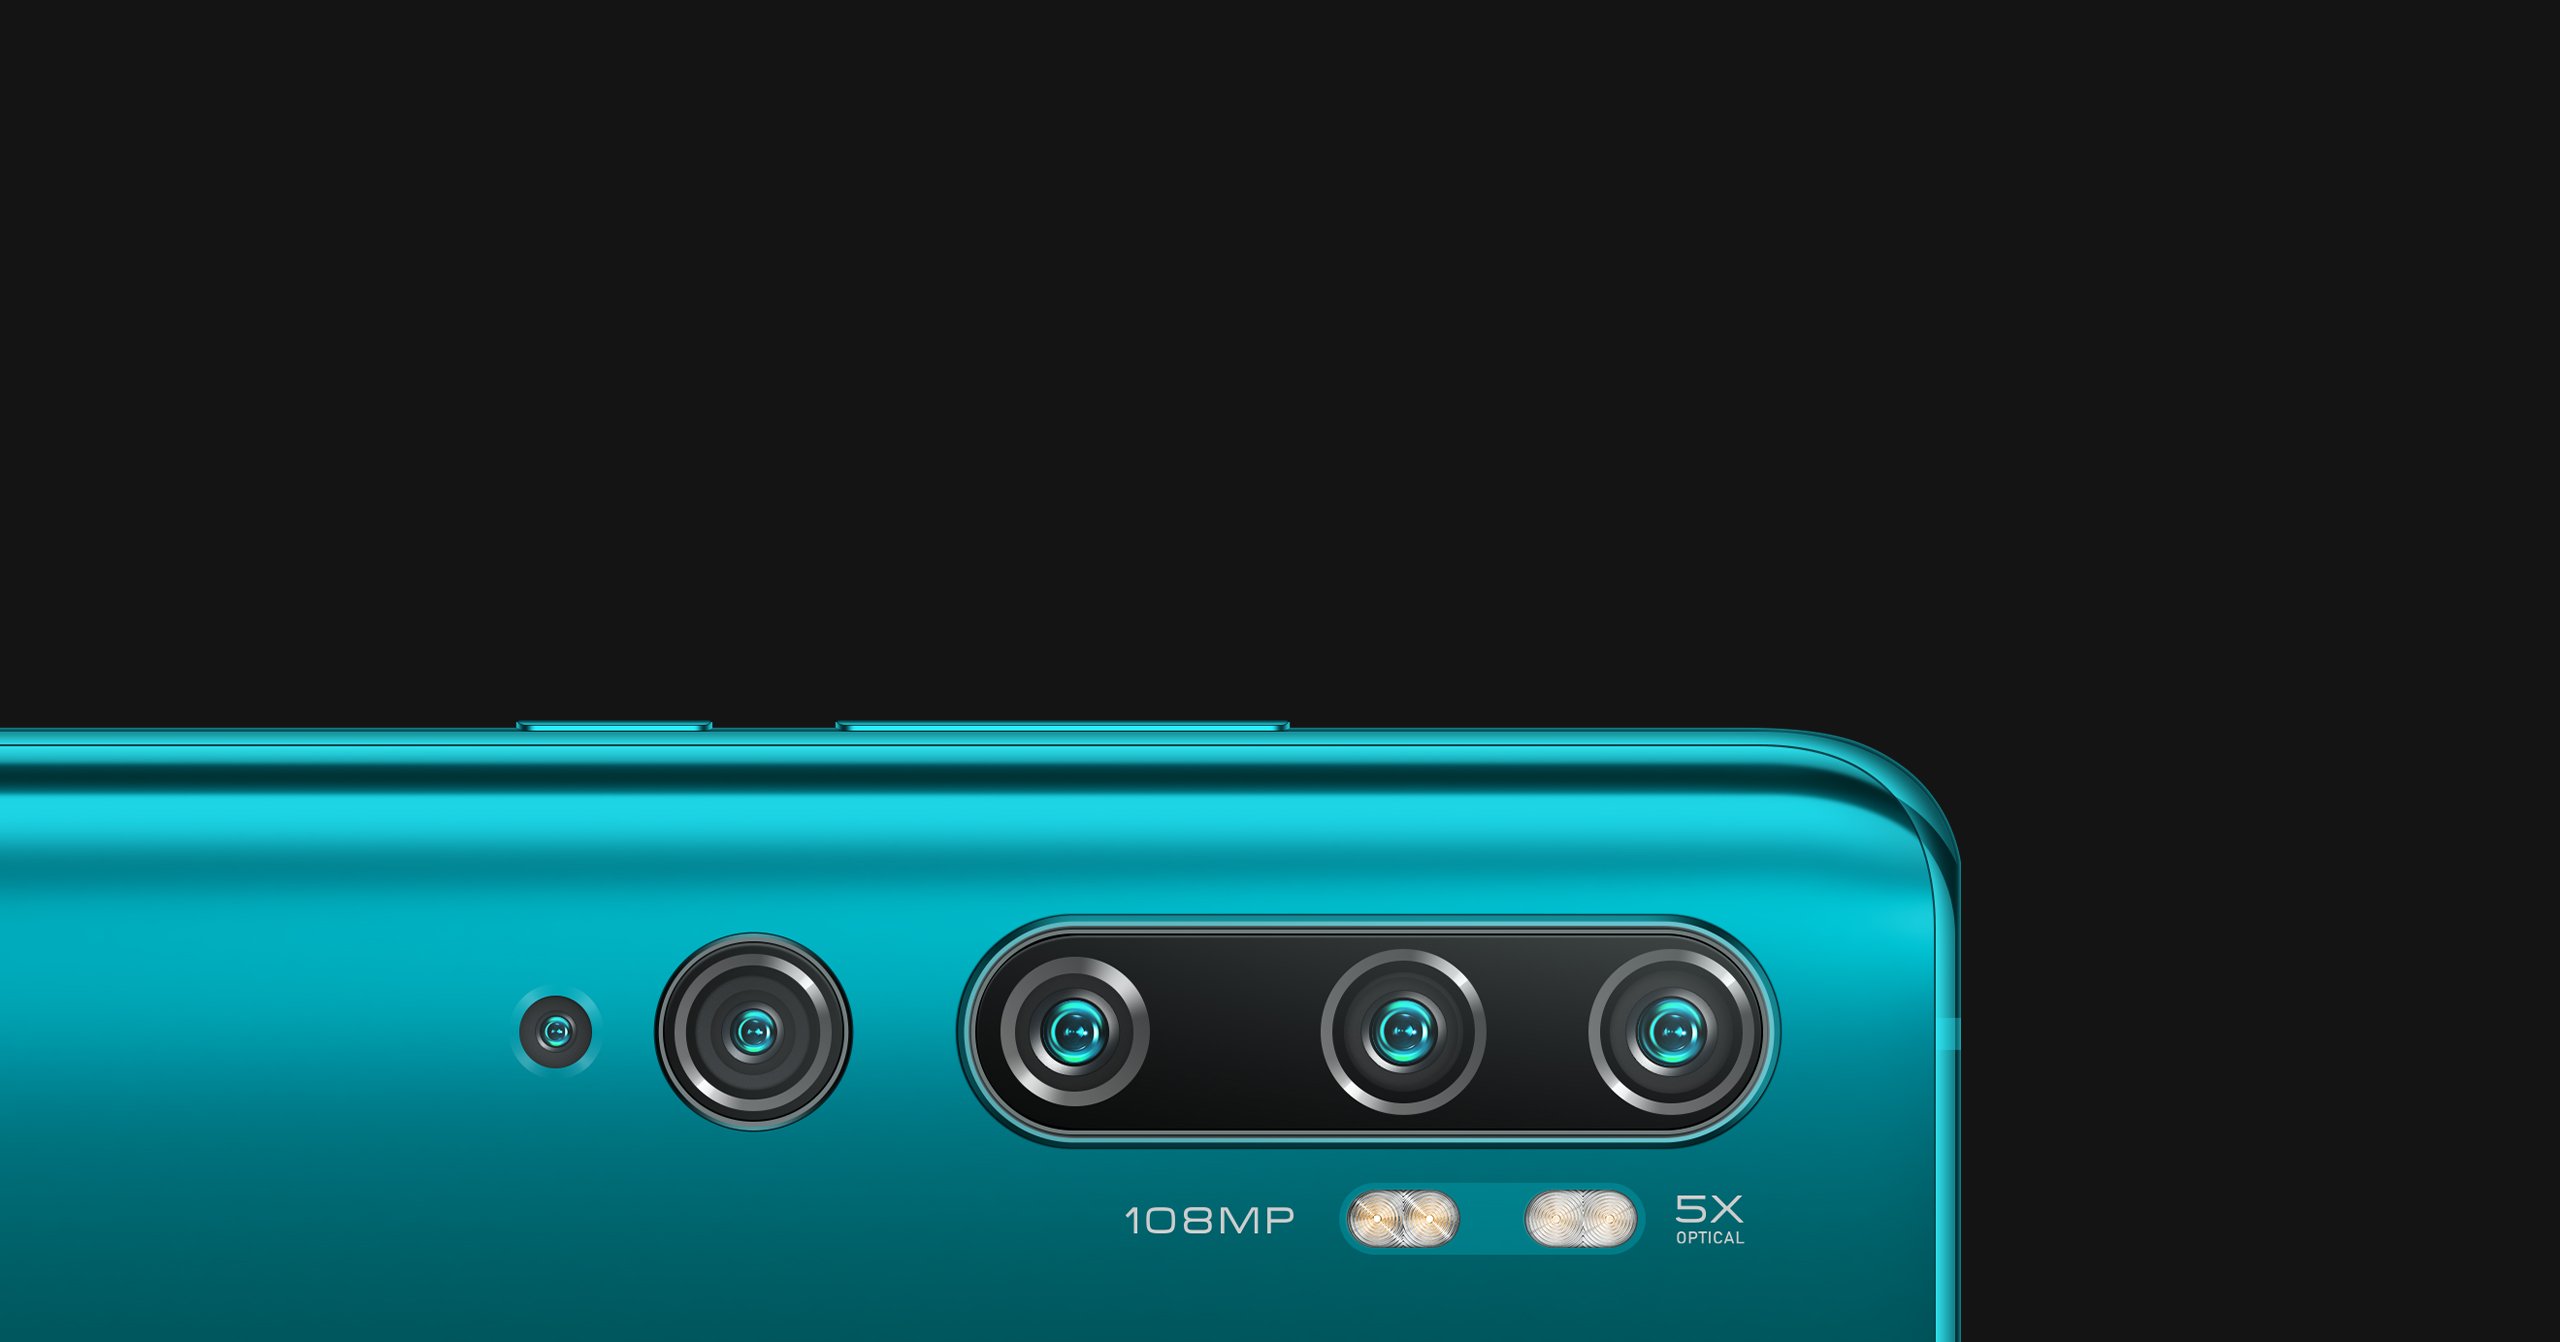 Xiaomi Unveils the CC9 Pro with Six Cameras and a 108MP Image Sensor